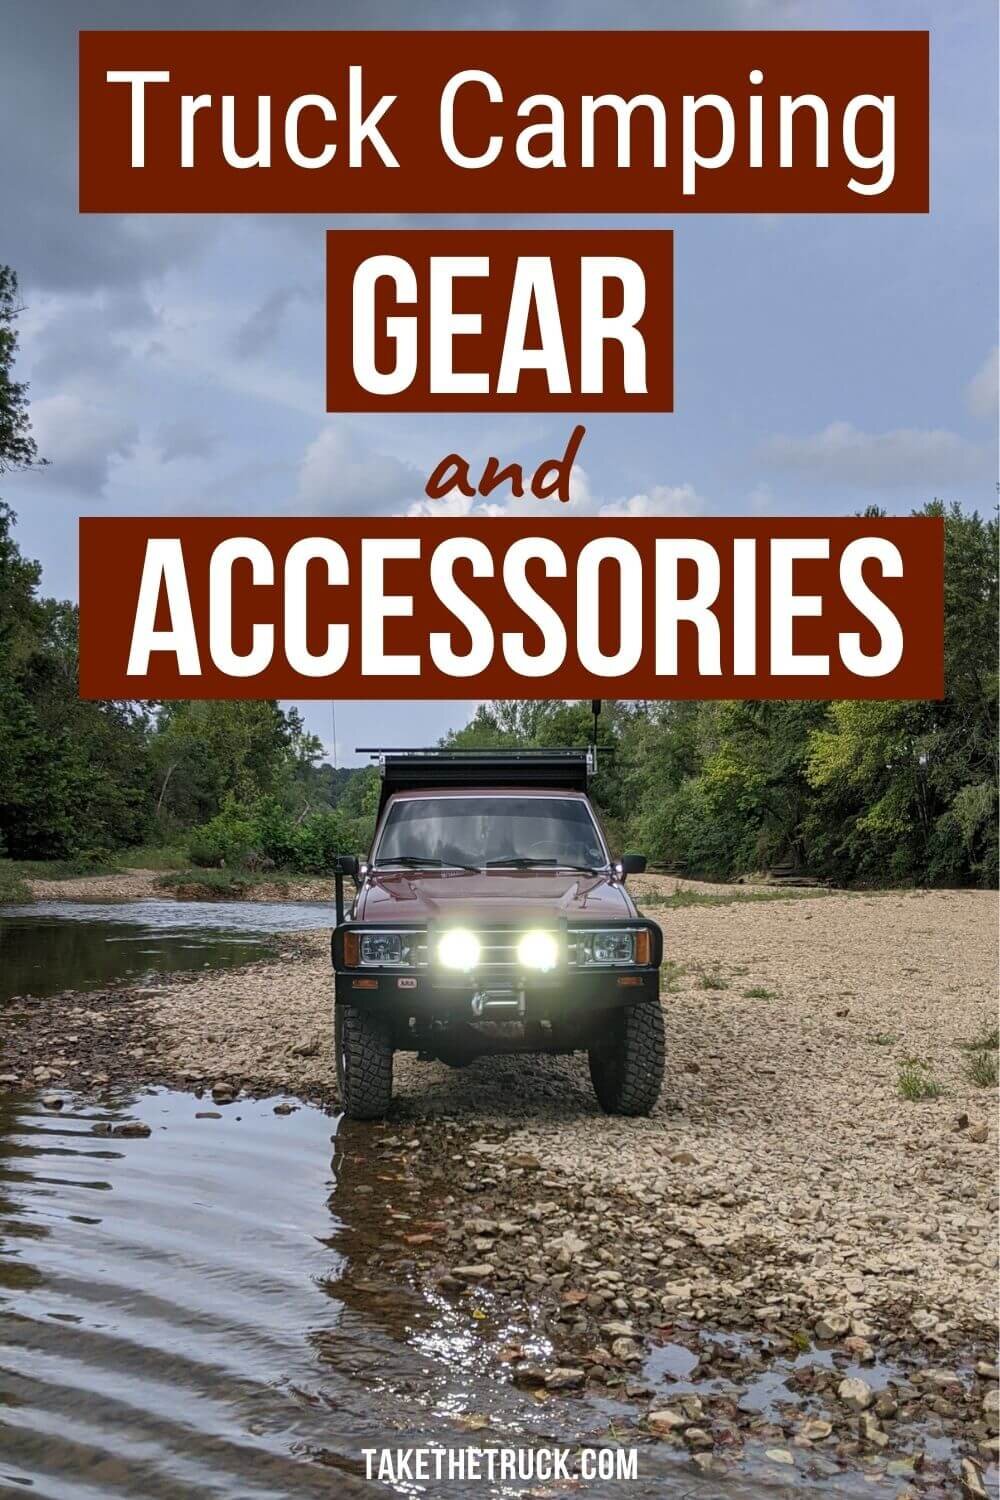 Visit our gear page to see what truck camping accessories and overlanding gear we use and love after years of experience with wild camping and traveling from our truck bed camper.